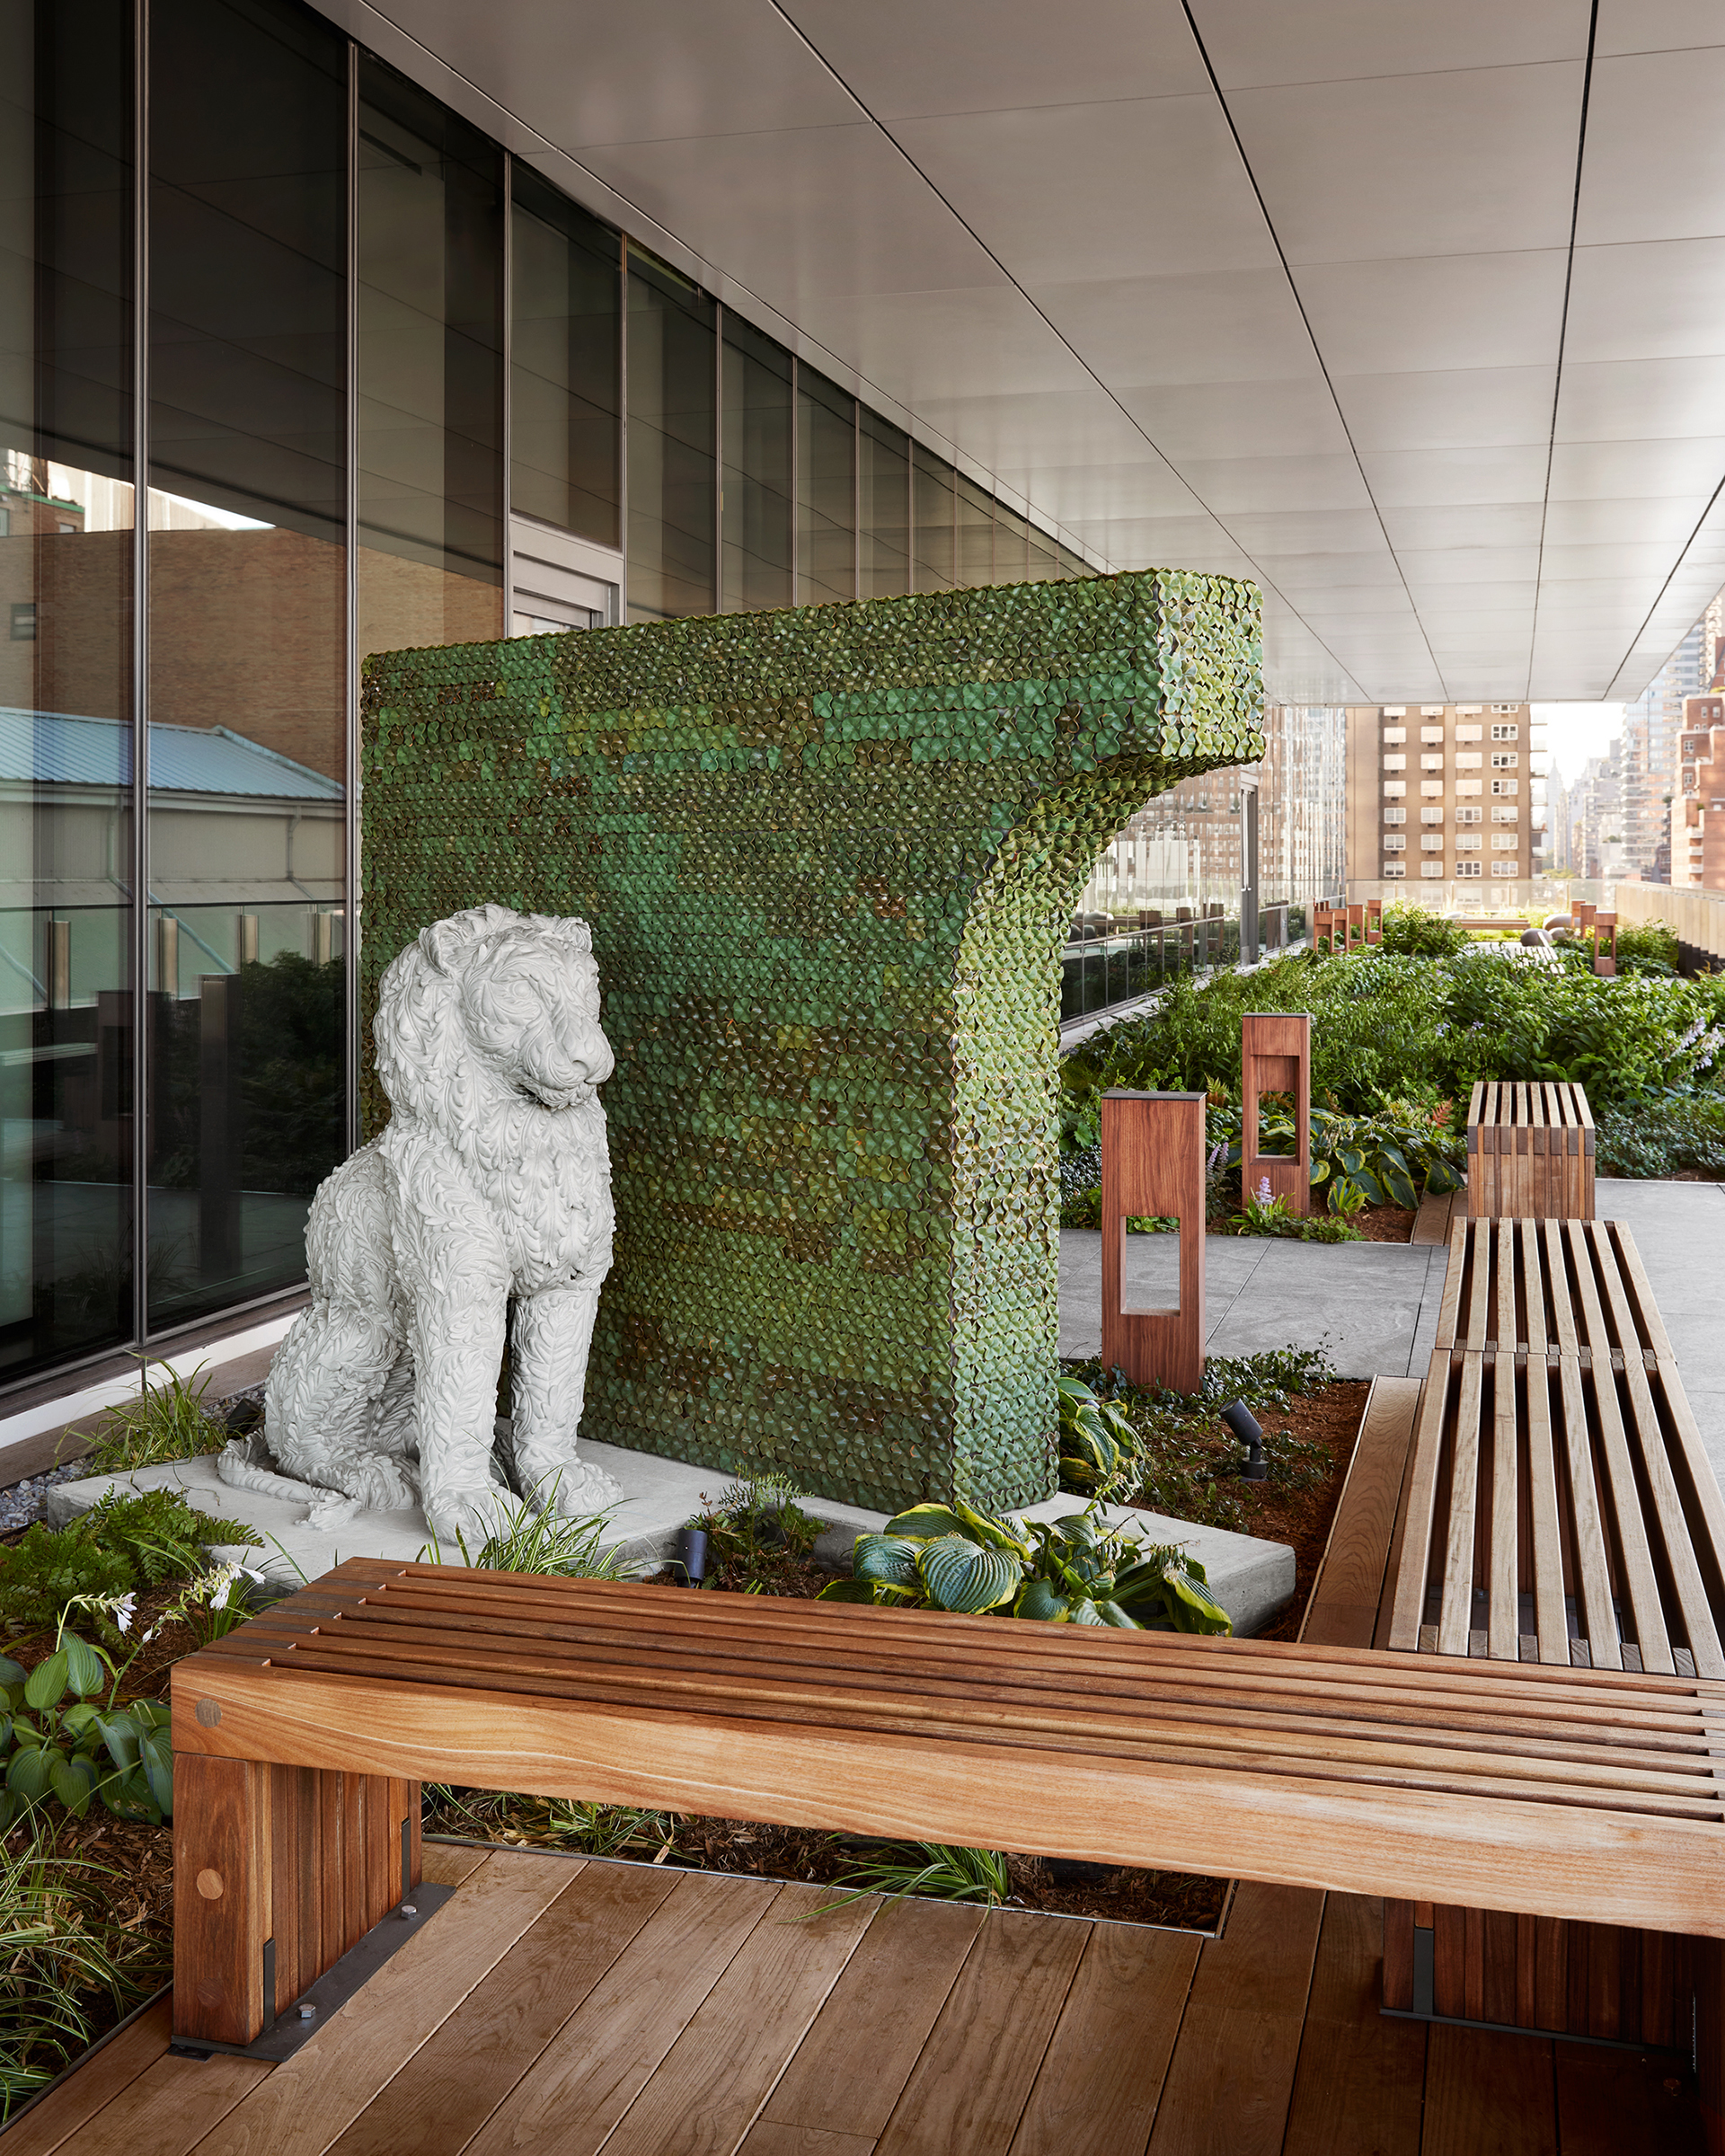 Kim Dickey Sculptures at Memorial Sloan Kettering’s David H. Koch Center for Cancer Care